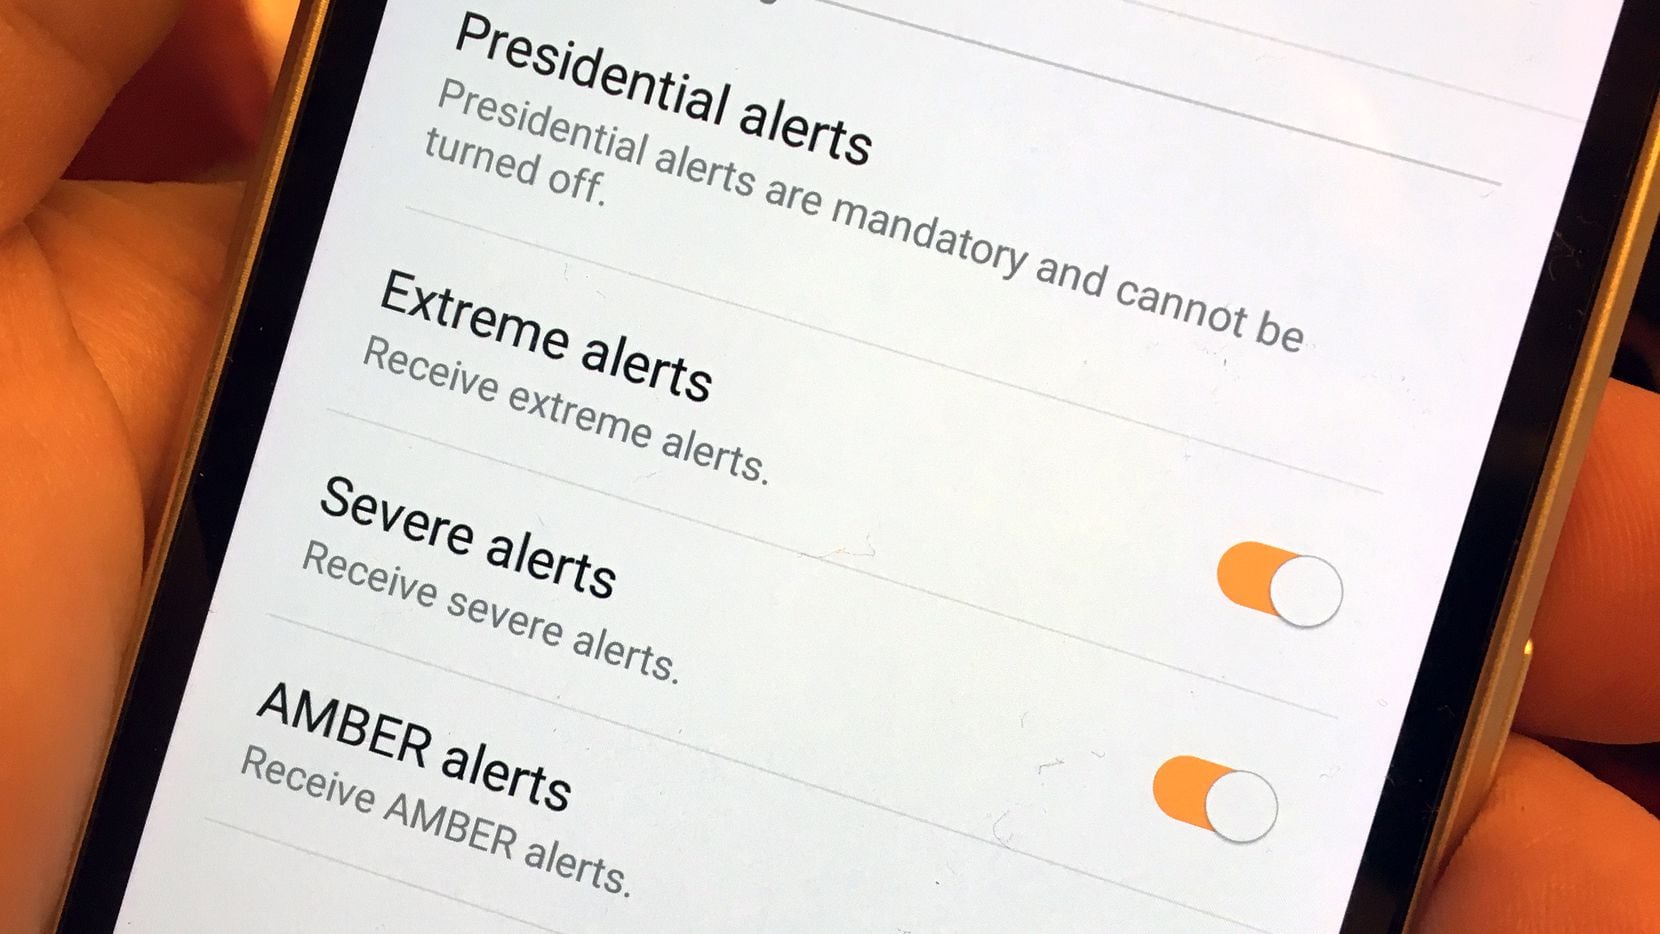 Learn how to enable and disable emergency alerts on your smartphone